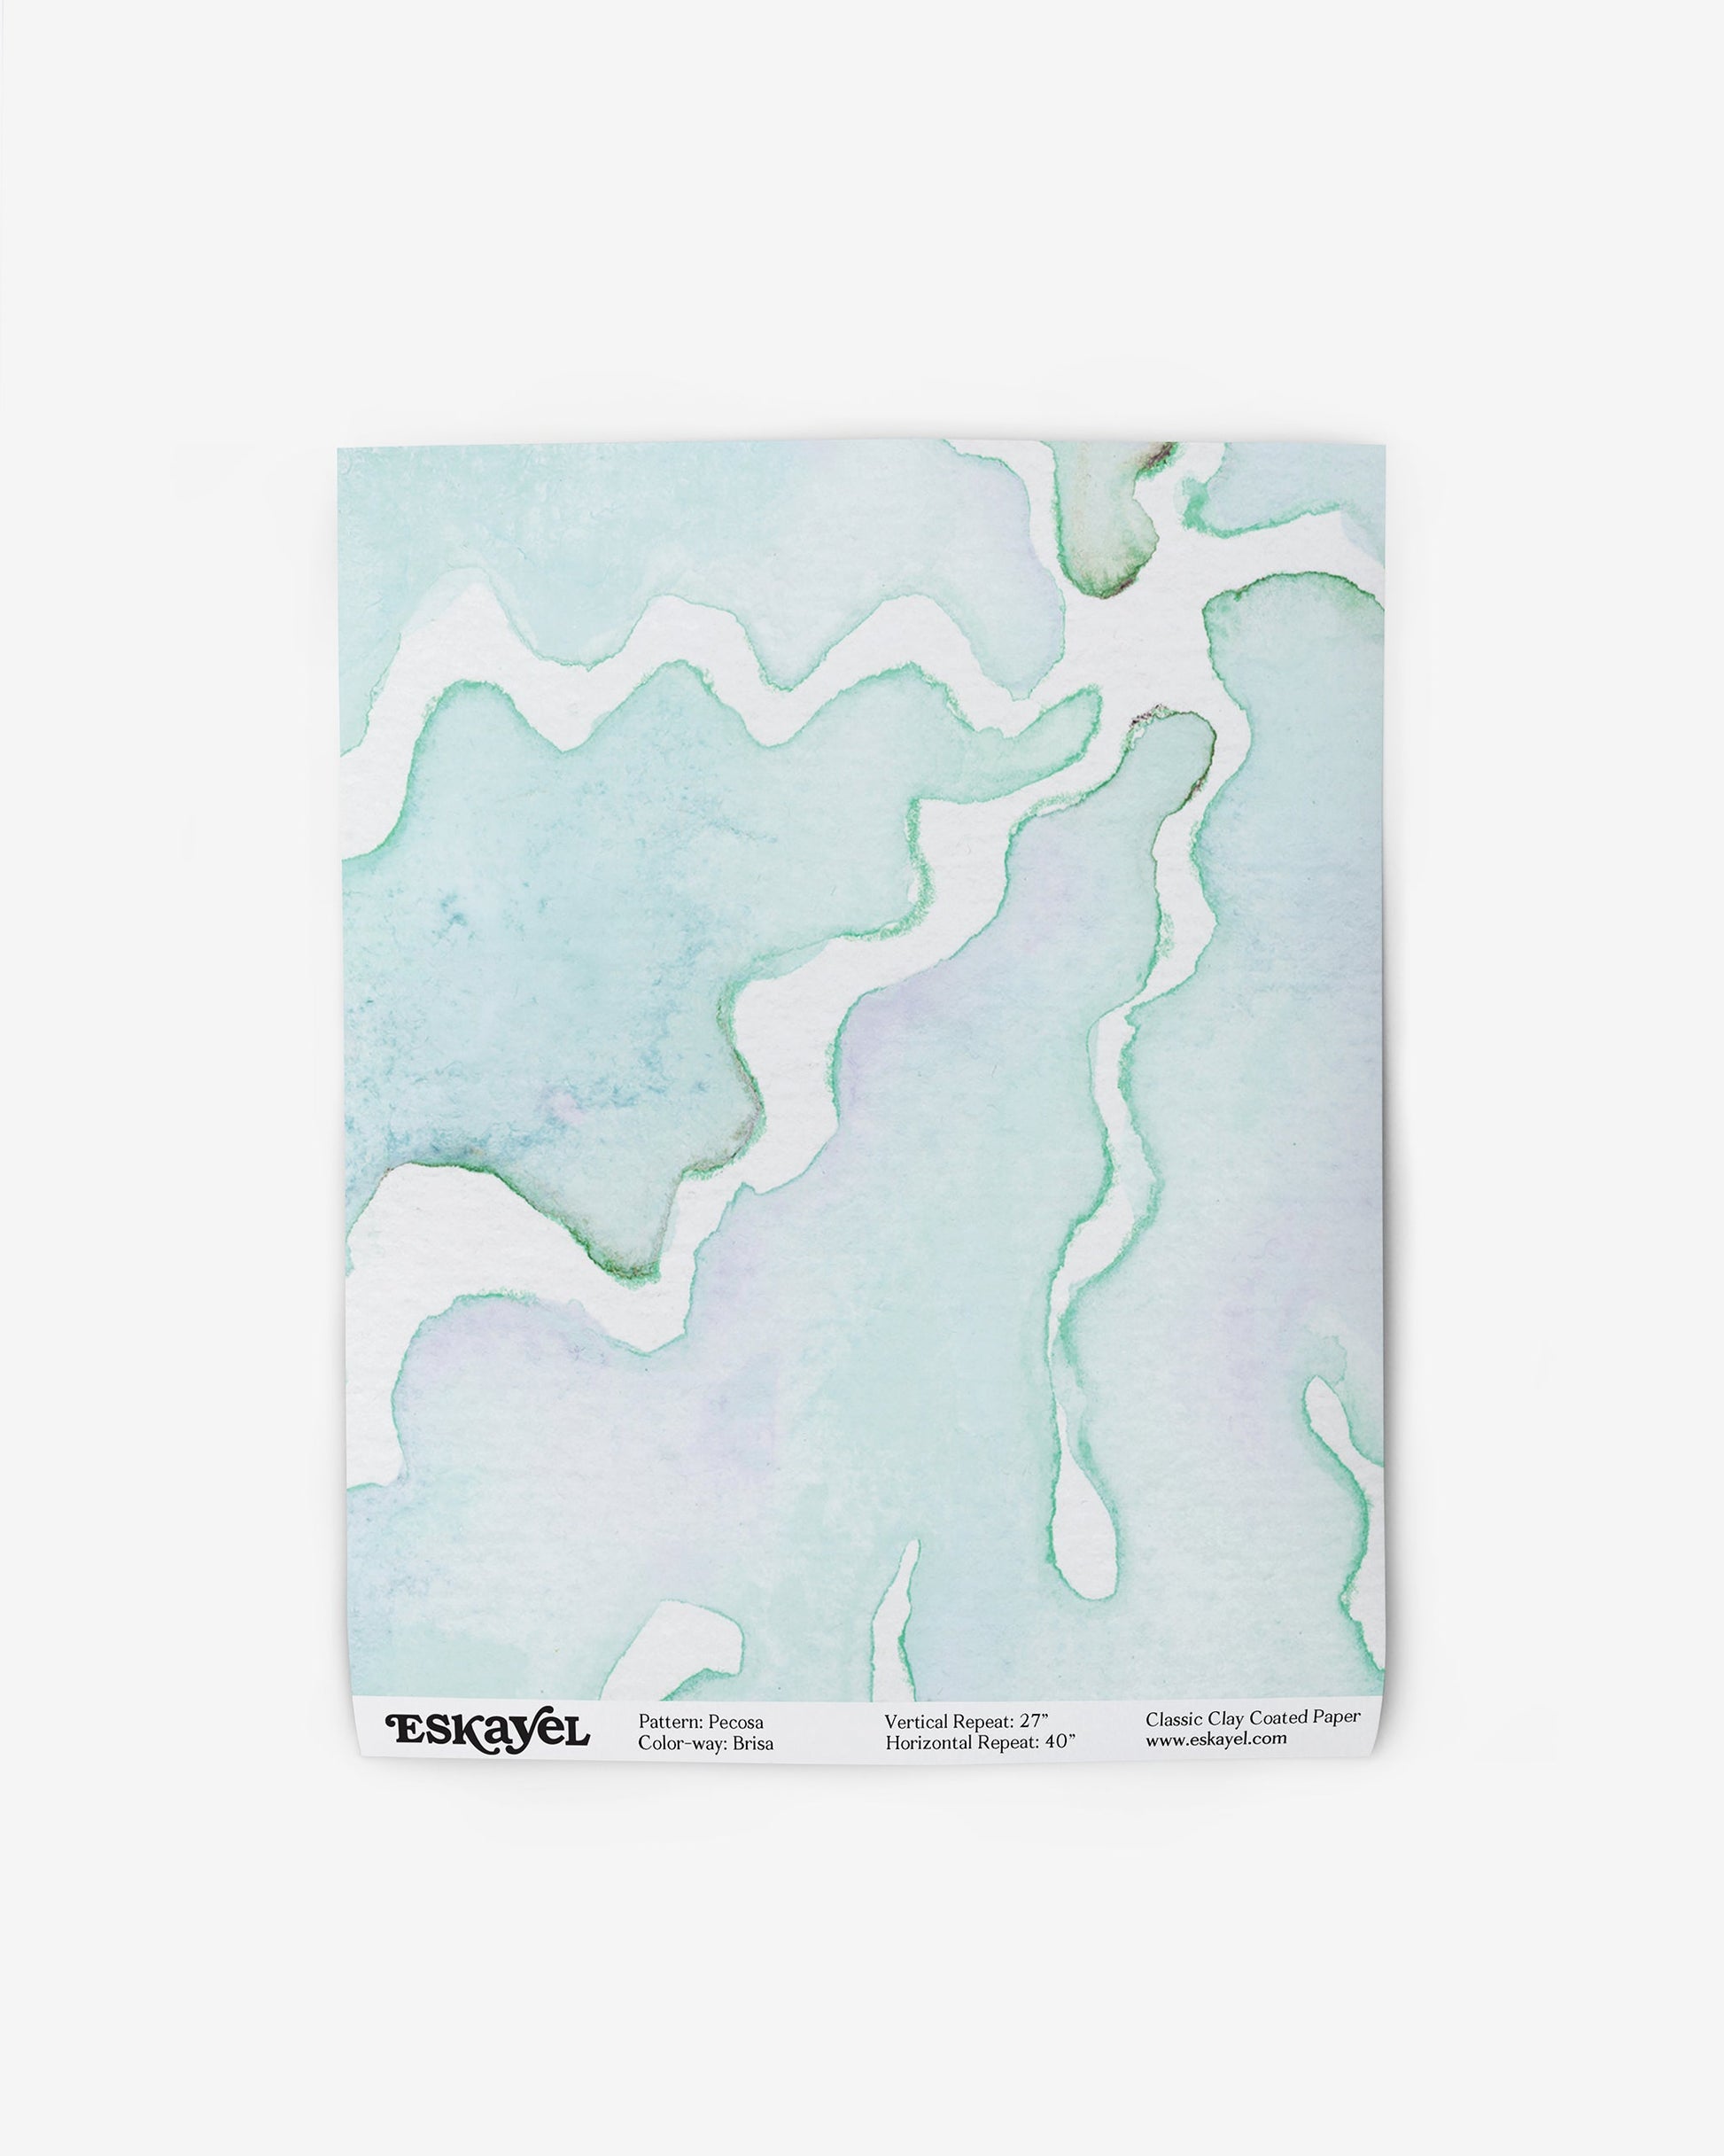 A notebook with a Pecosa Wallpaper Brisa watercolor design on its fabric cover